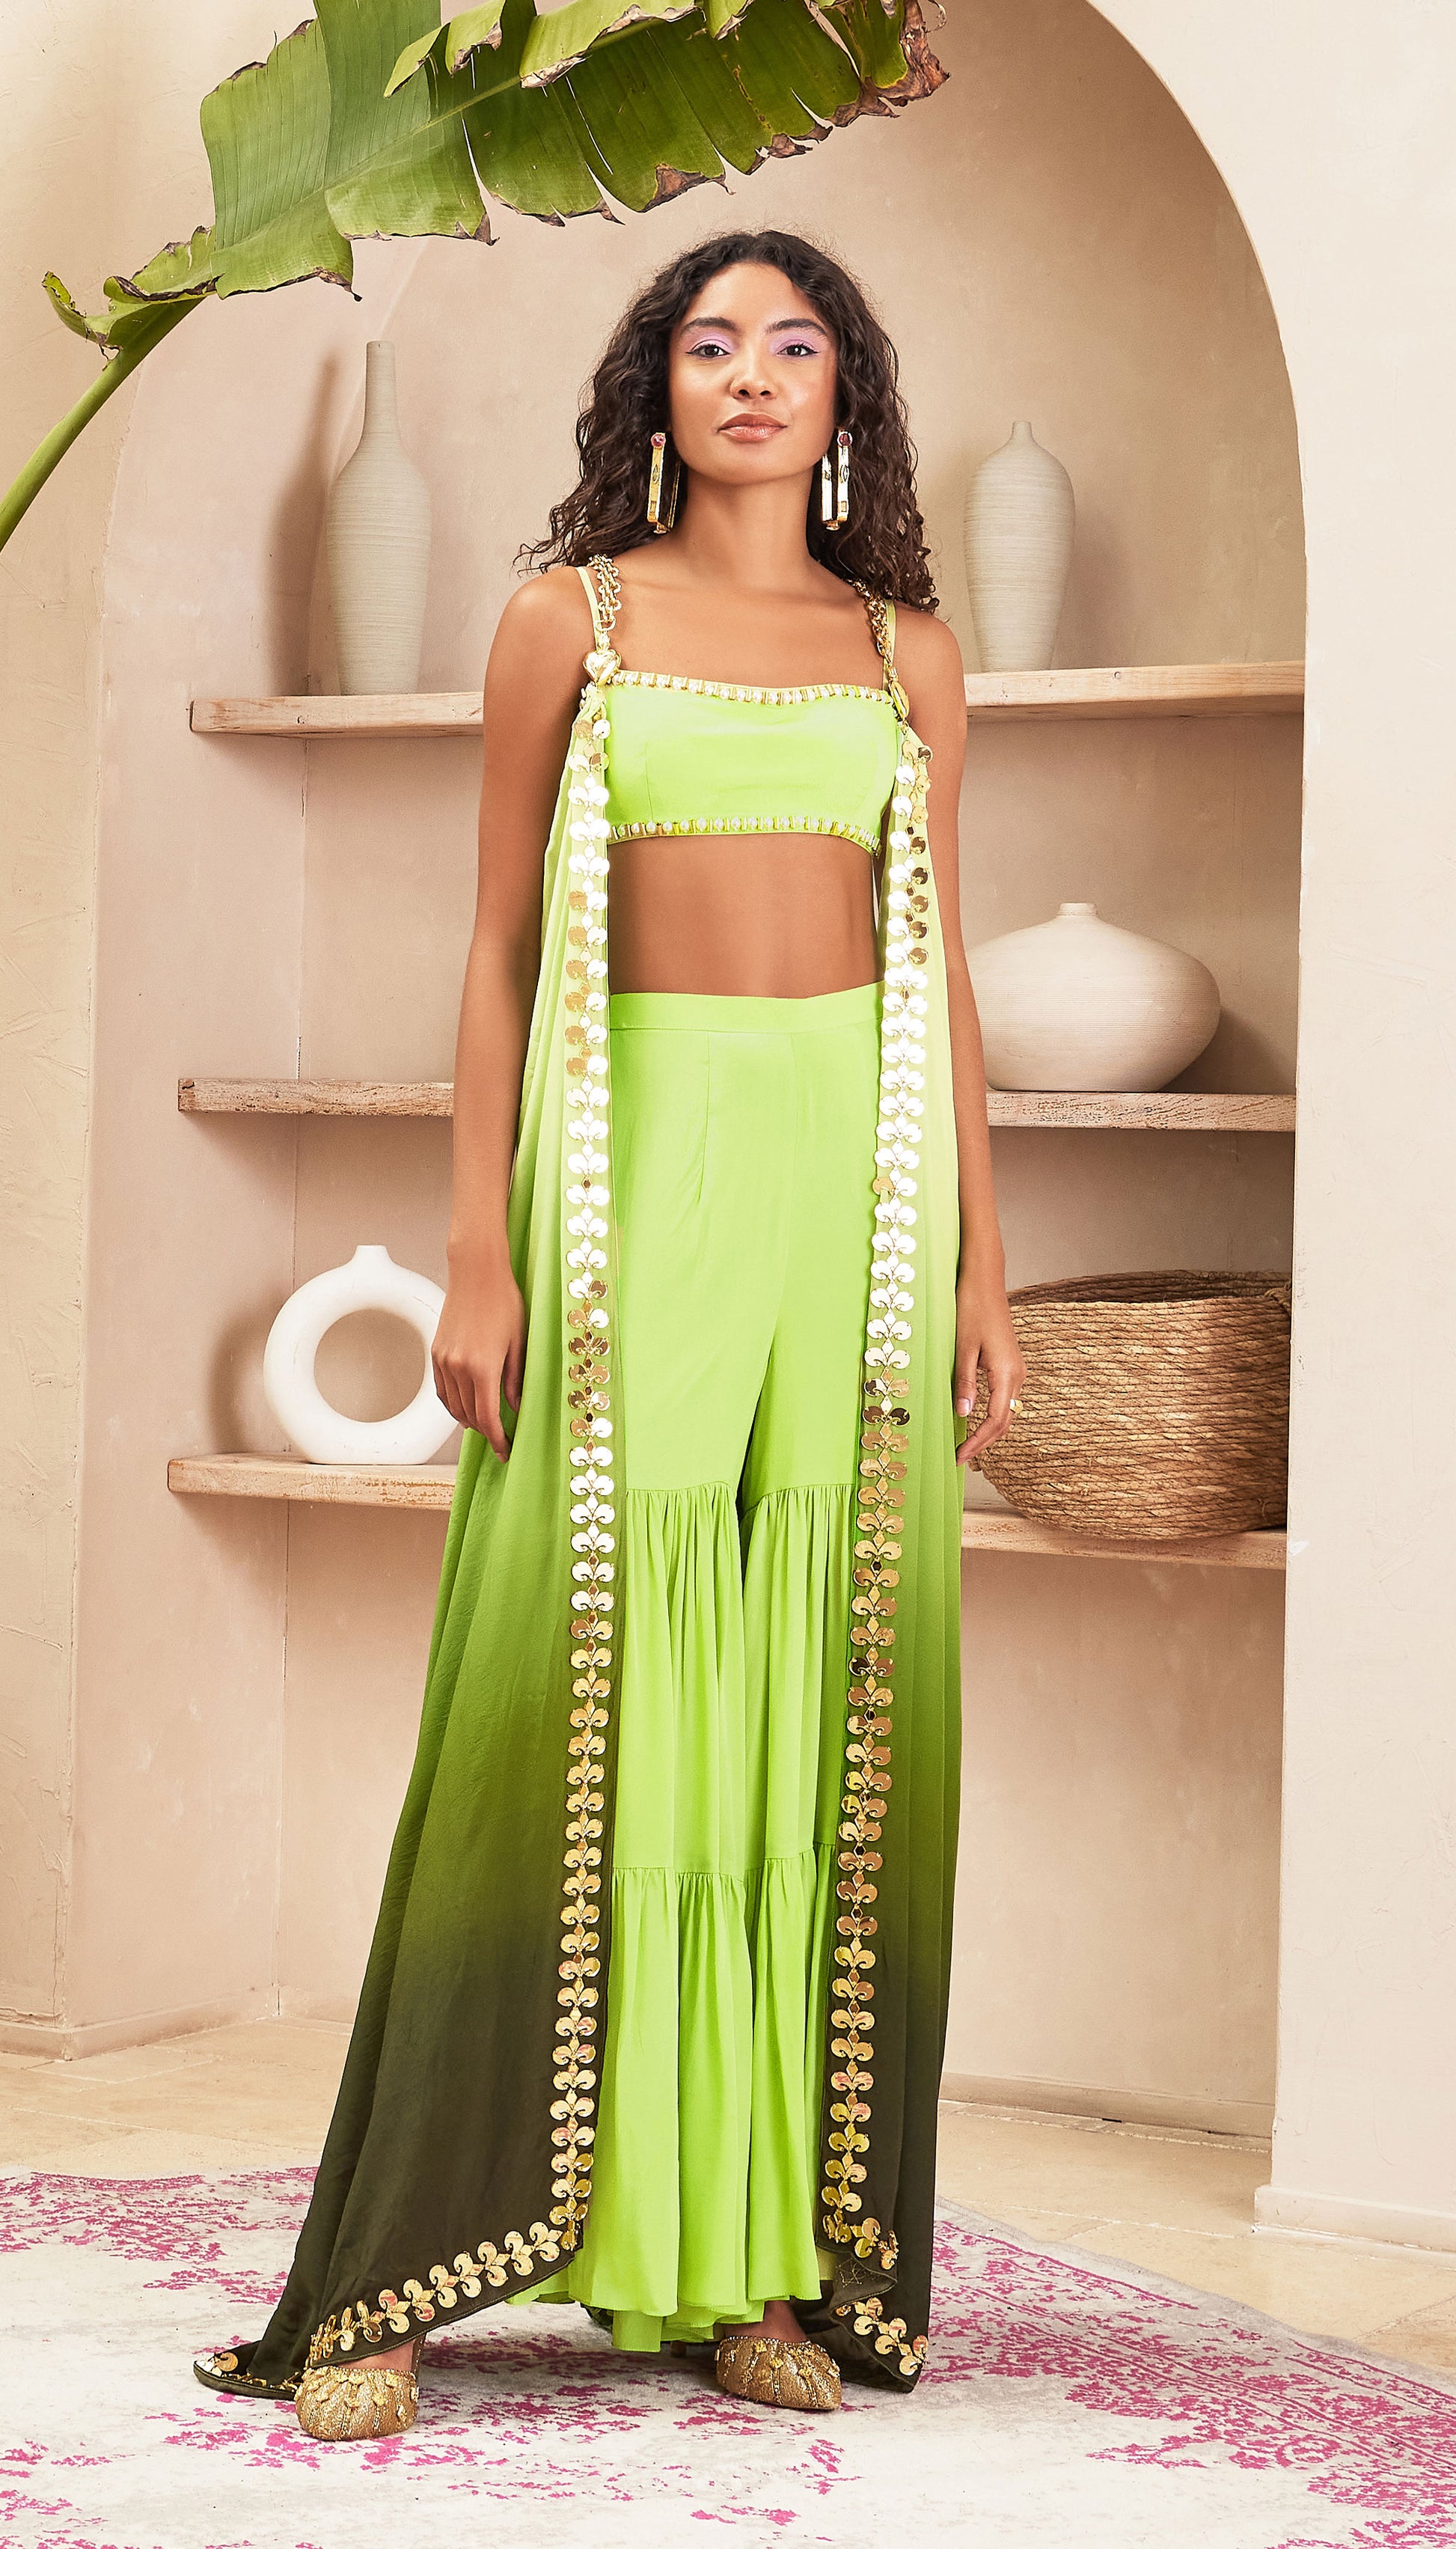 Leyan - Green Ombre Jacket with Bustier and Pants – Papa Don't Preach